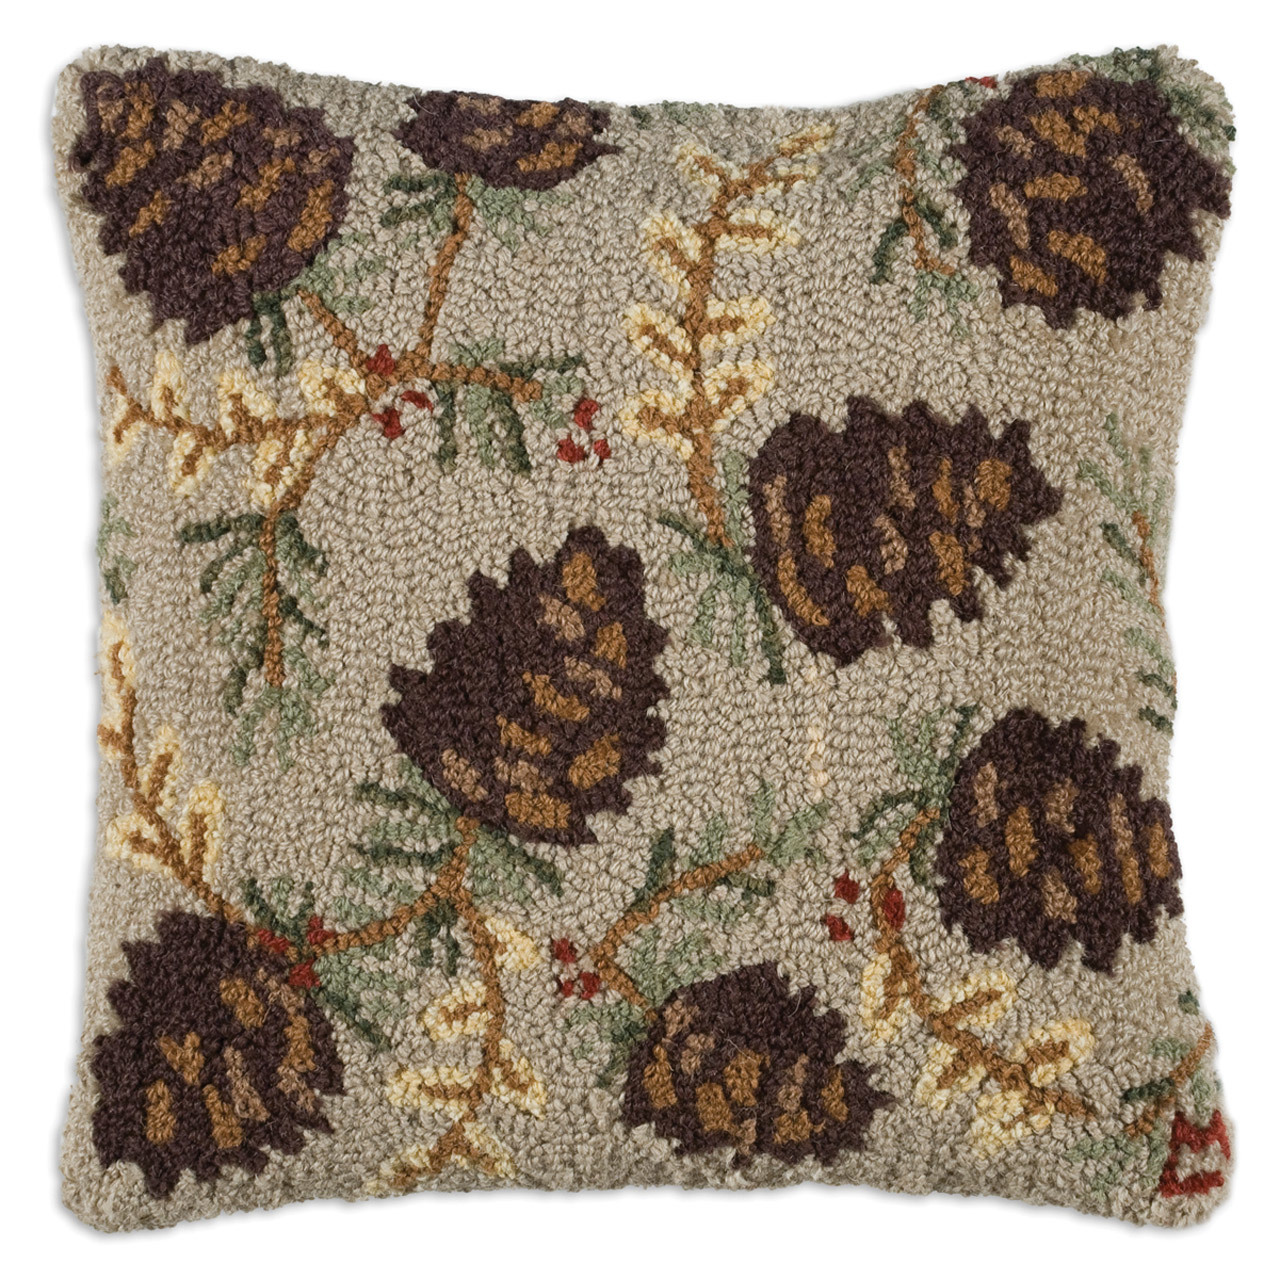 pinecones and pine needles on a throw pillow Chandler 4 Corners